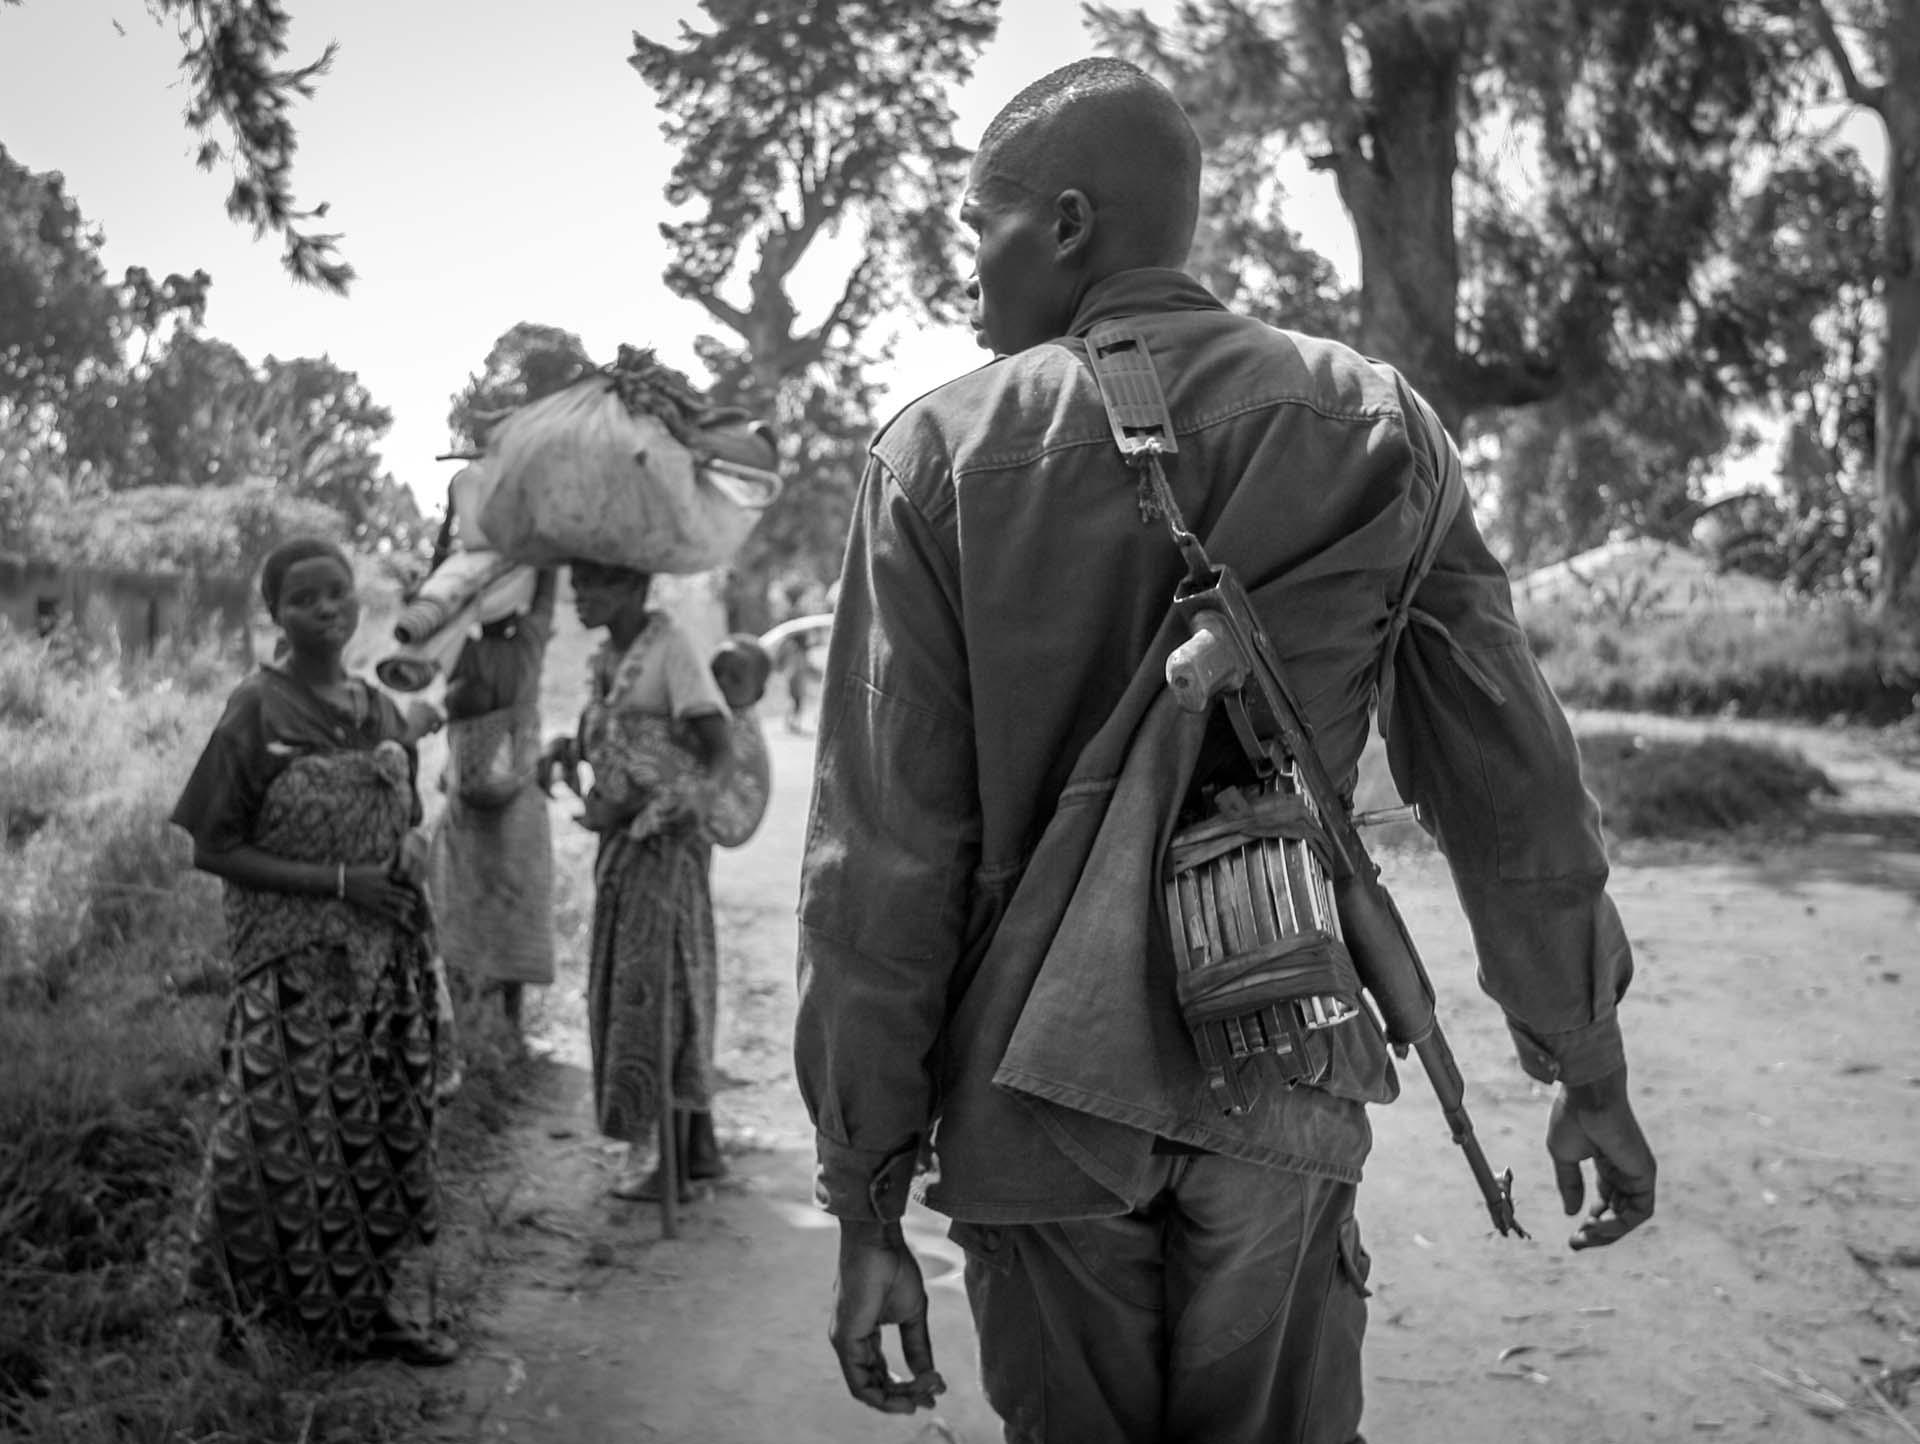  A solder roams along the path of IDPs (Internally displaced people) in the village of Gety, 60 km southwest of Bunia a regional capital of...